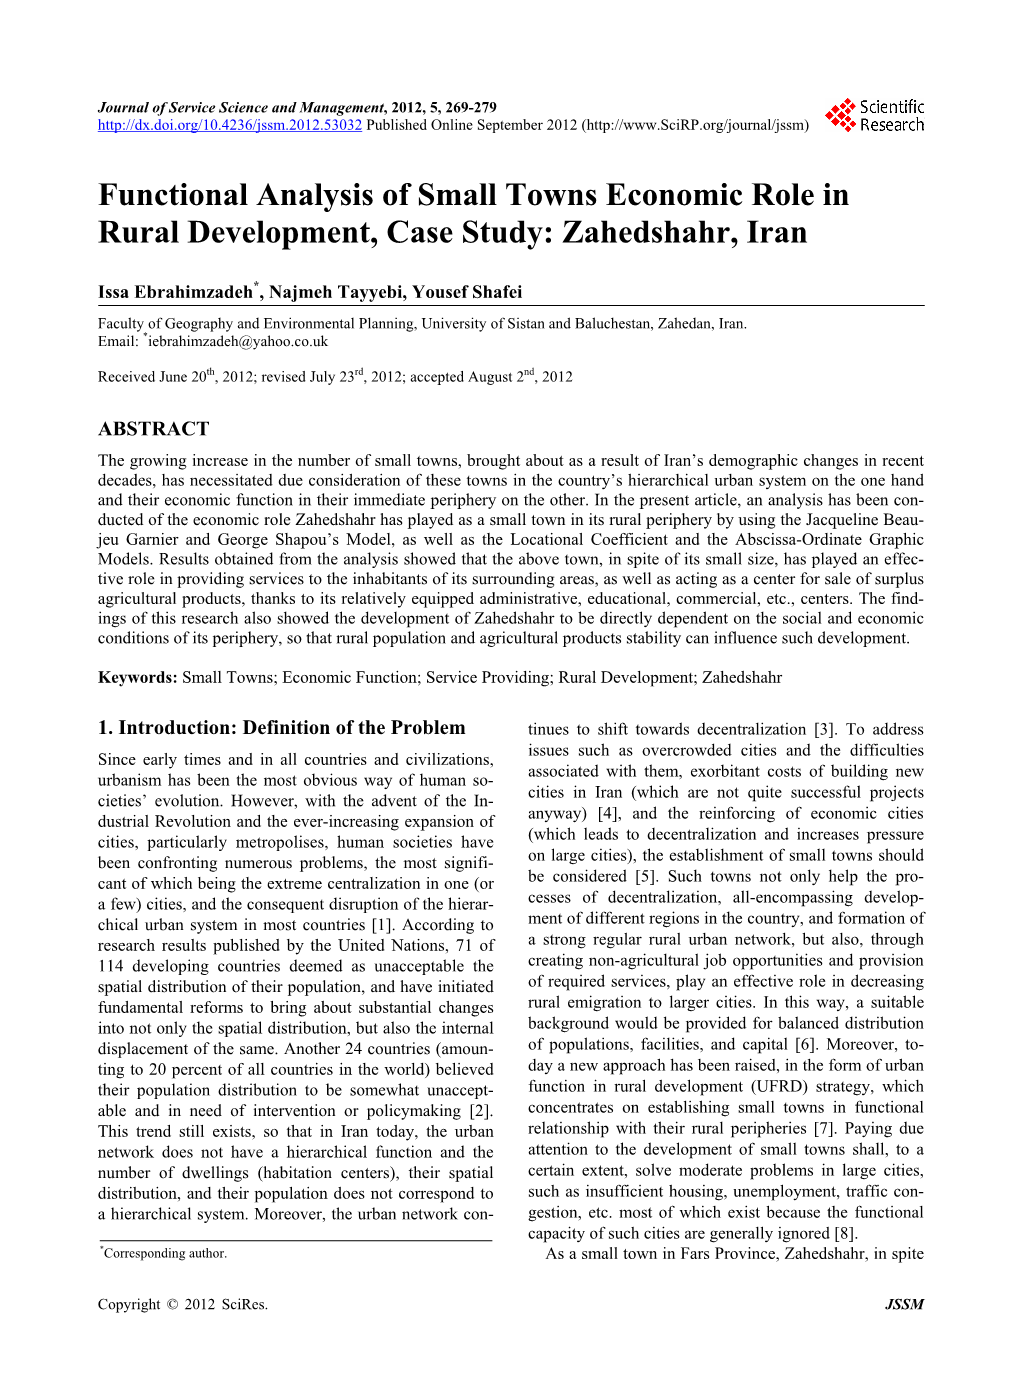 Functional Analysis of Small Towns Economic Role in Rural Development, Case Study: Zahedshahr, Iran